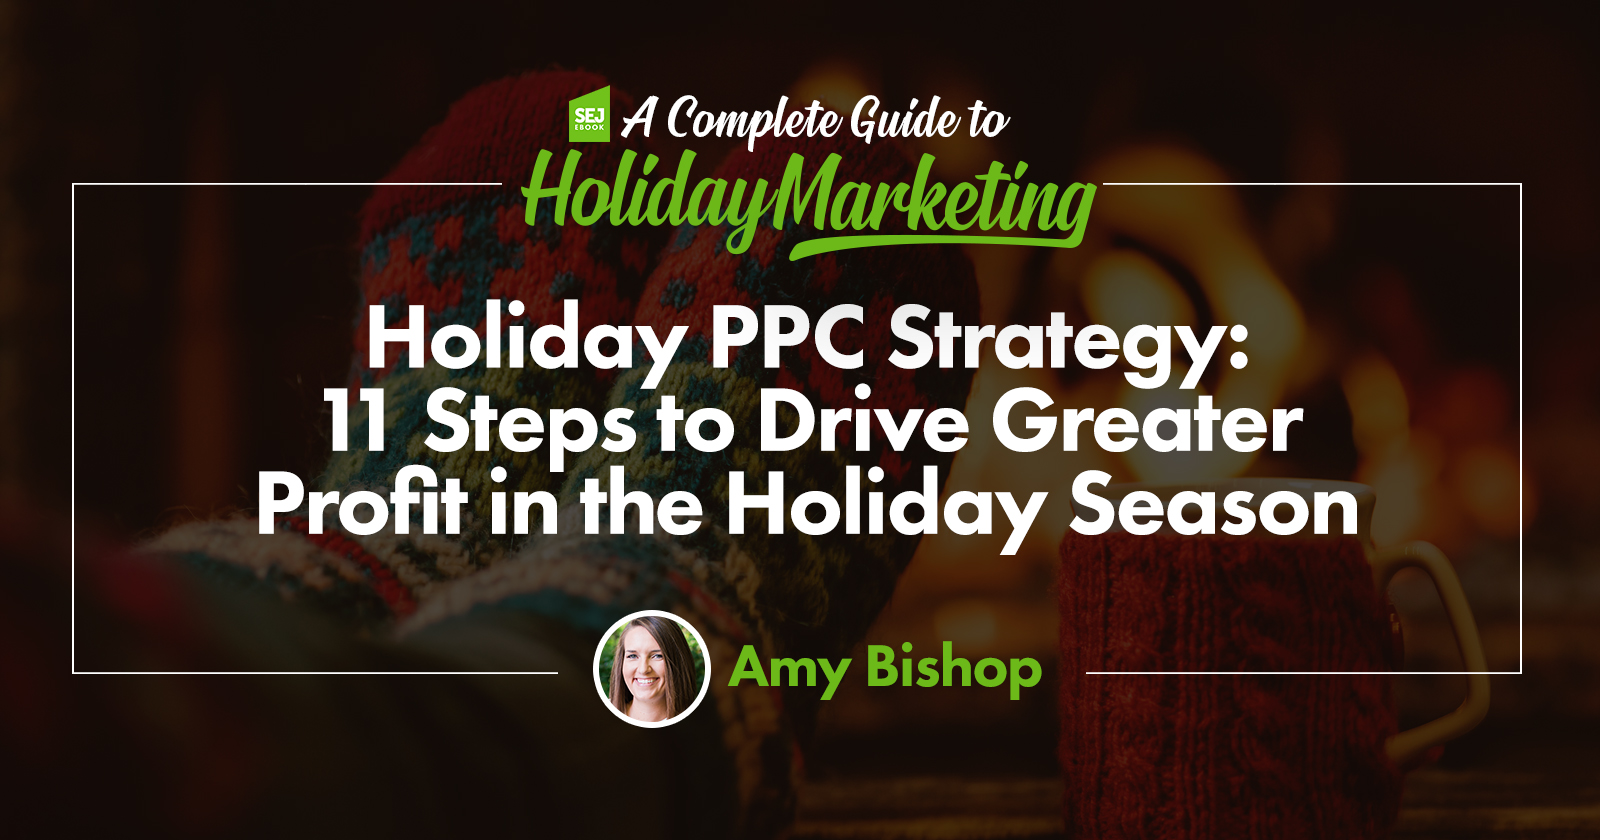 Holiday PPC Strategy - 11 Steps to Drive Greater Profit in the Holiday Season